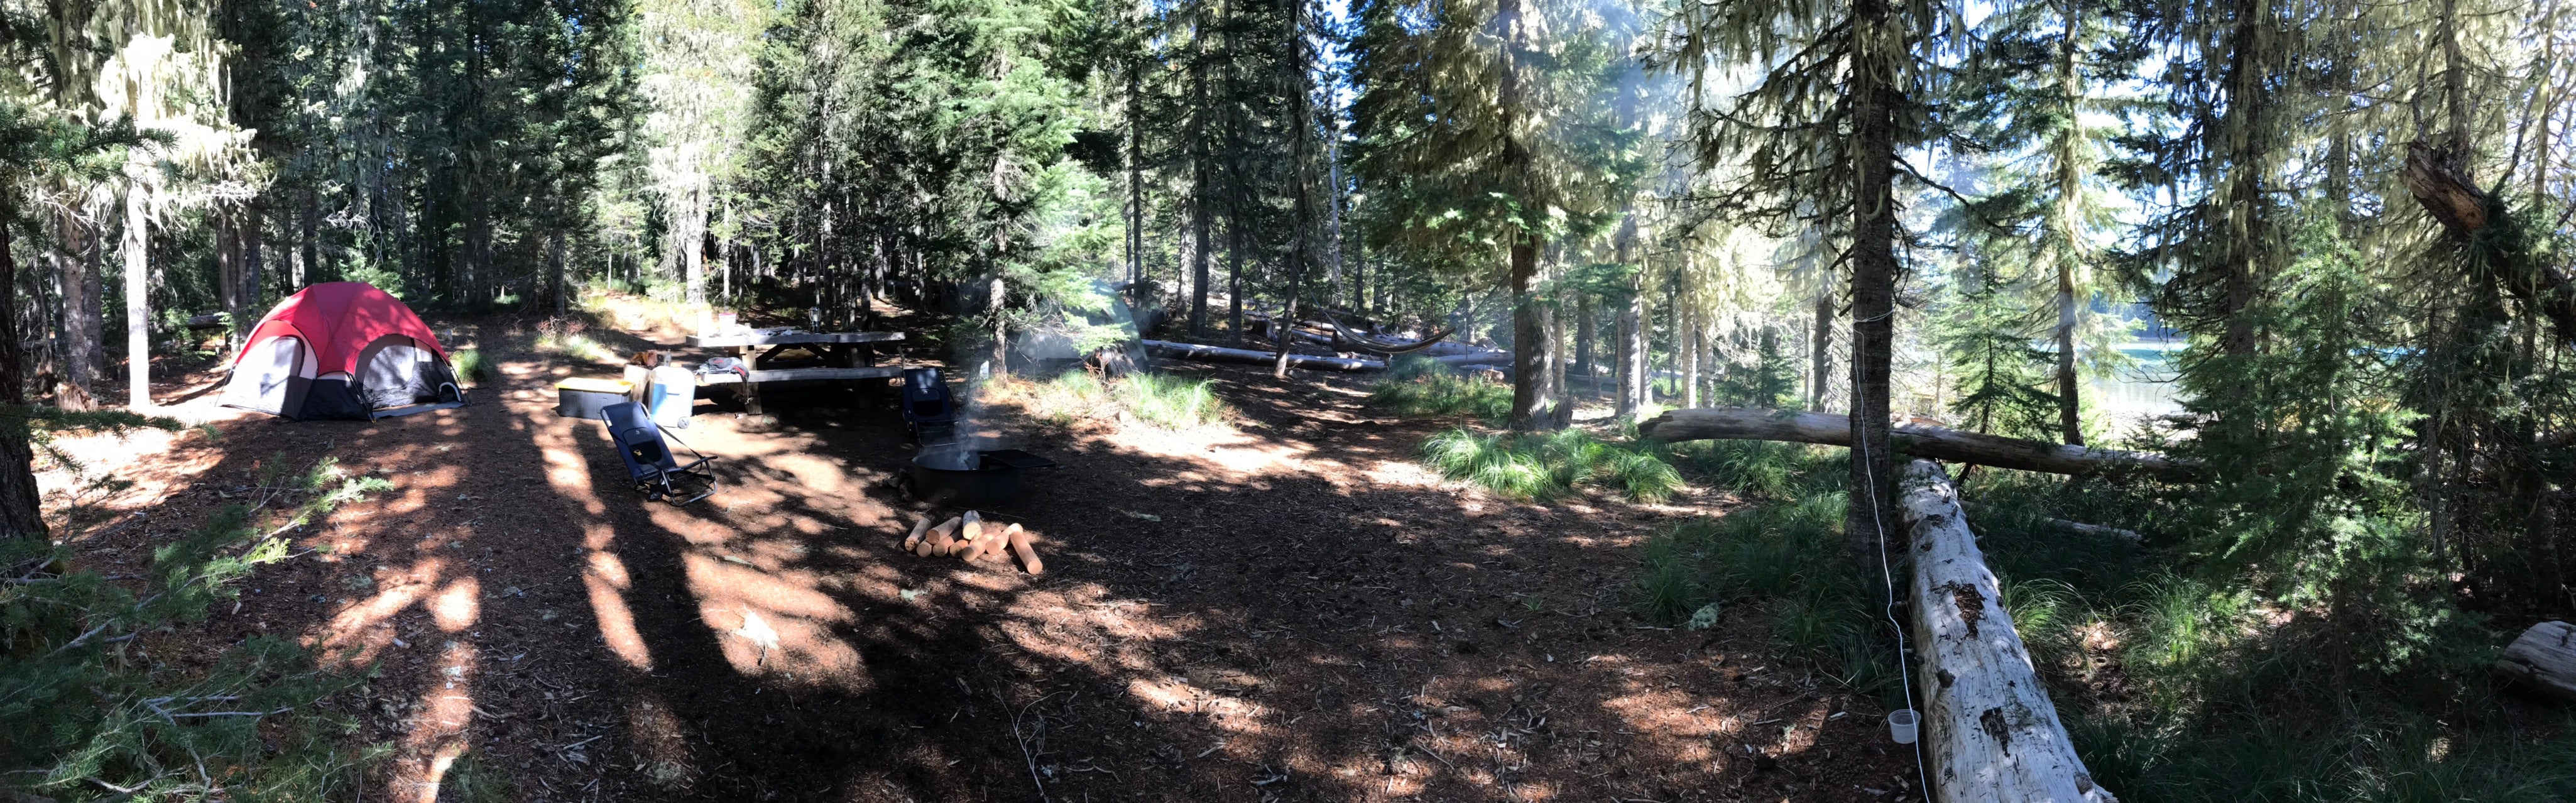 Camper submitted image from Scott Lake Campground - 5